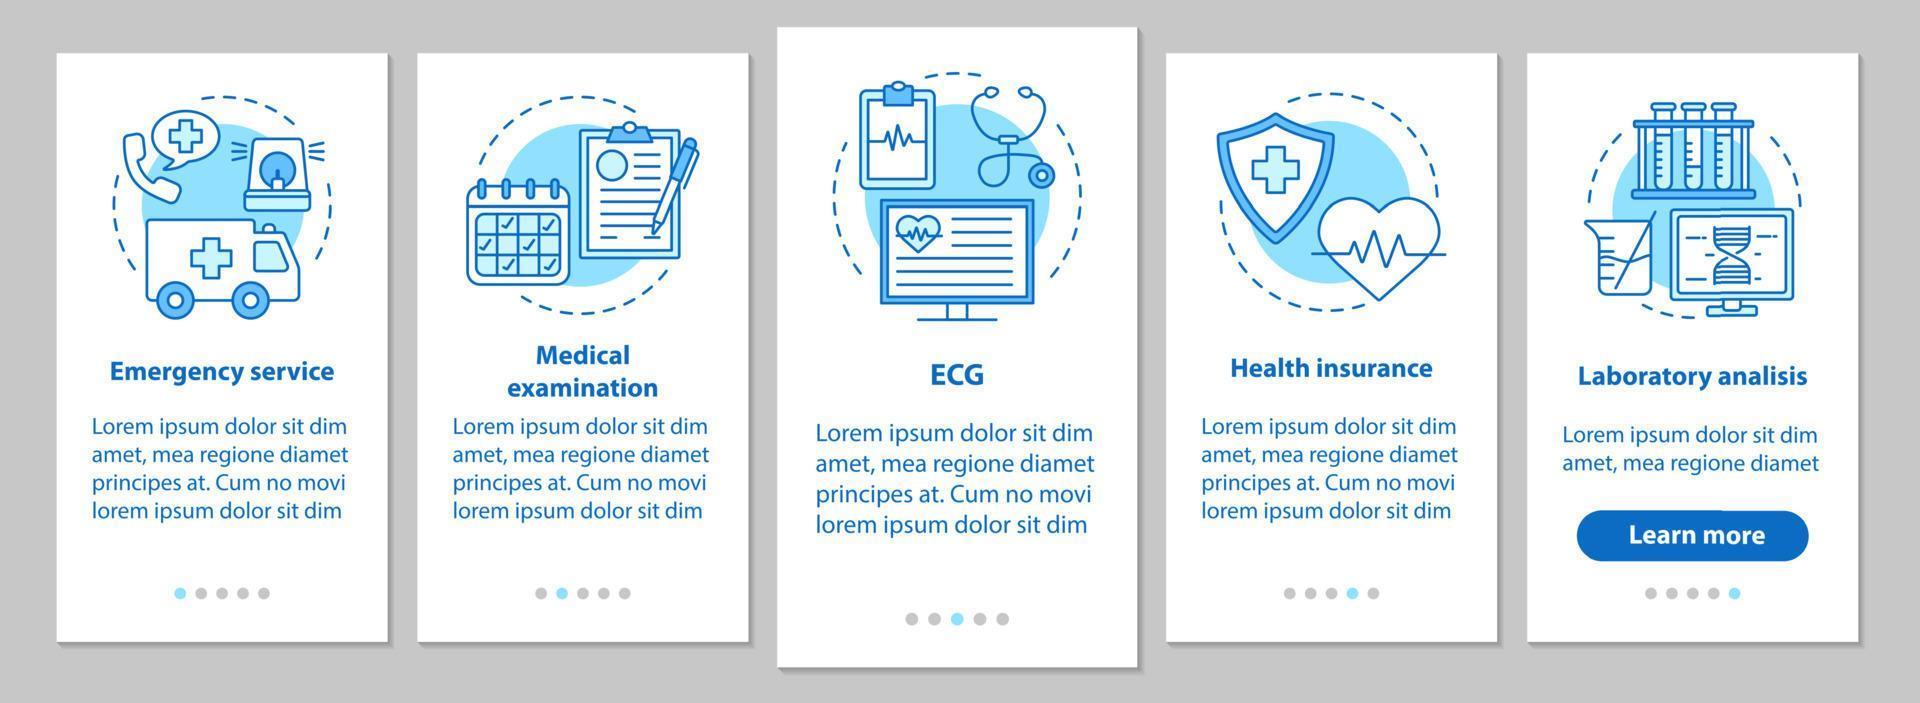 Medicine and healthcare onboarding mobile app page screen with linear concepts. Ambulance, examination, ECG, health insurance, lab analysis steps graphic instructions. UX, UI, GUI vector illustrations